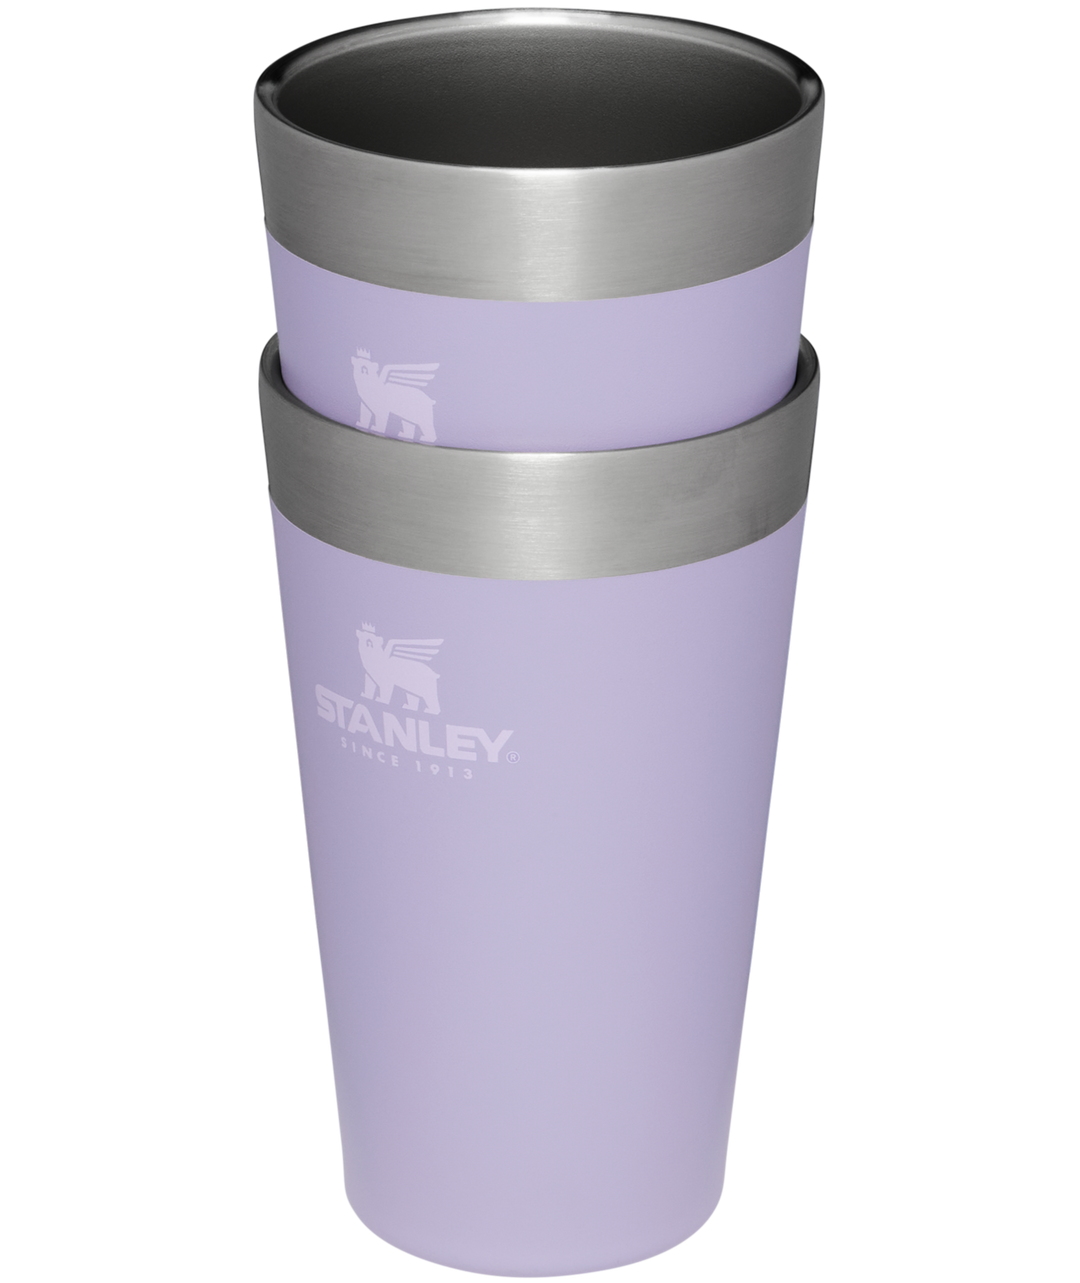 Stanley 16 oz. Adventure Stacking Pint Glass – 2 Pack, Lavender